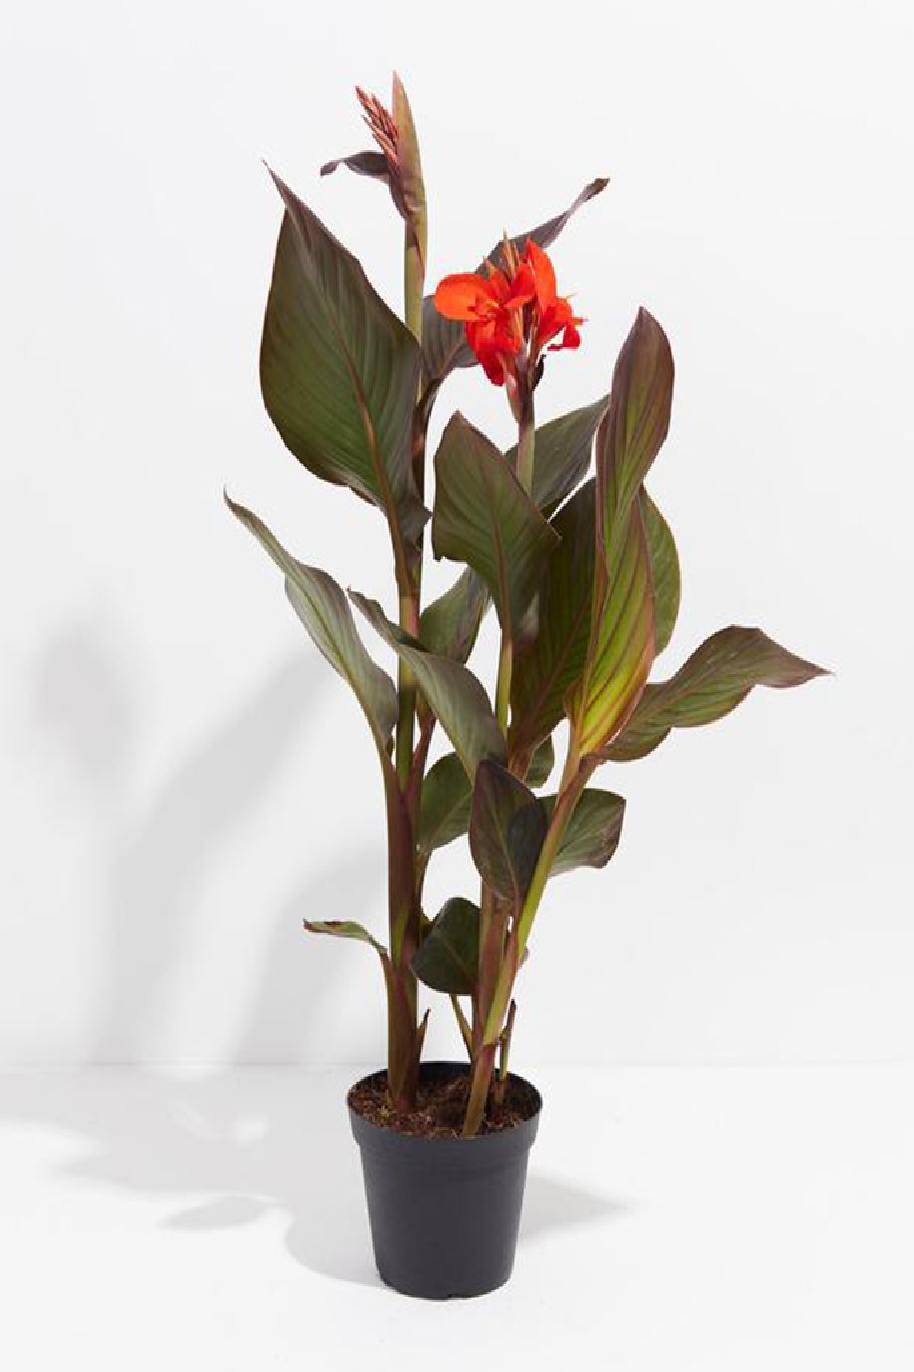 Canna Lily Red